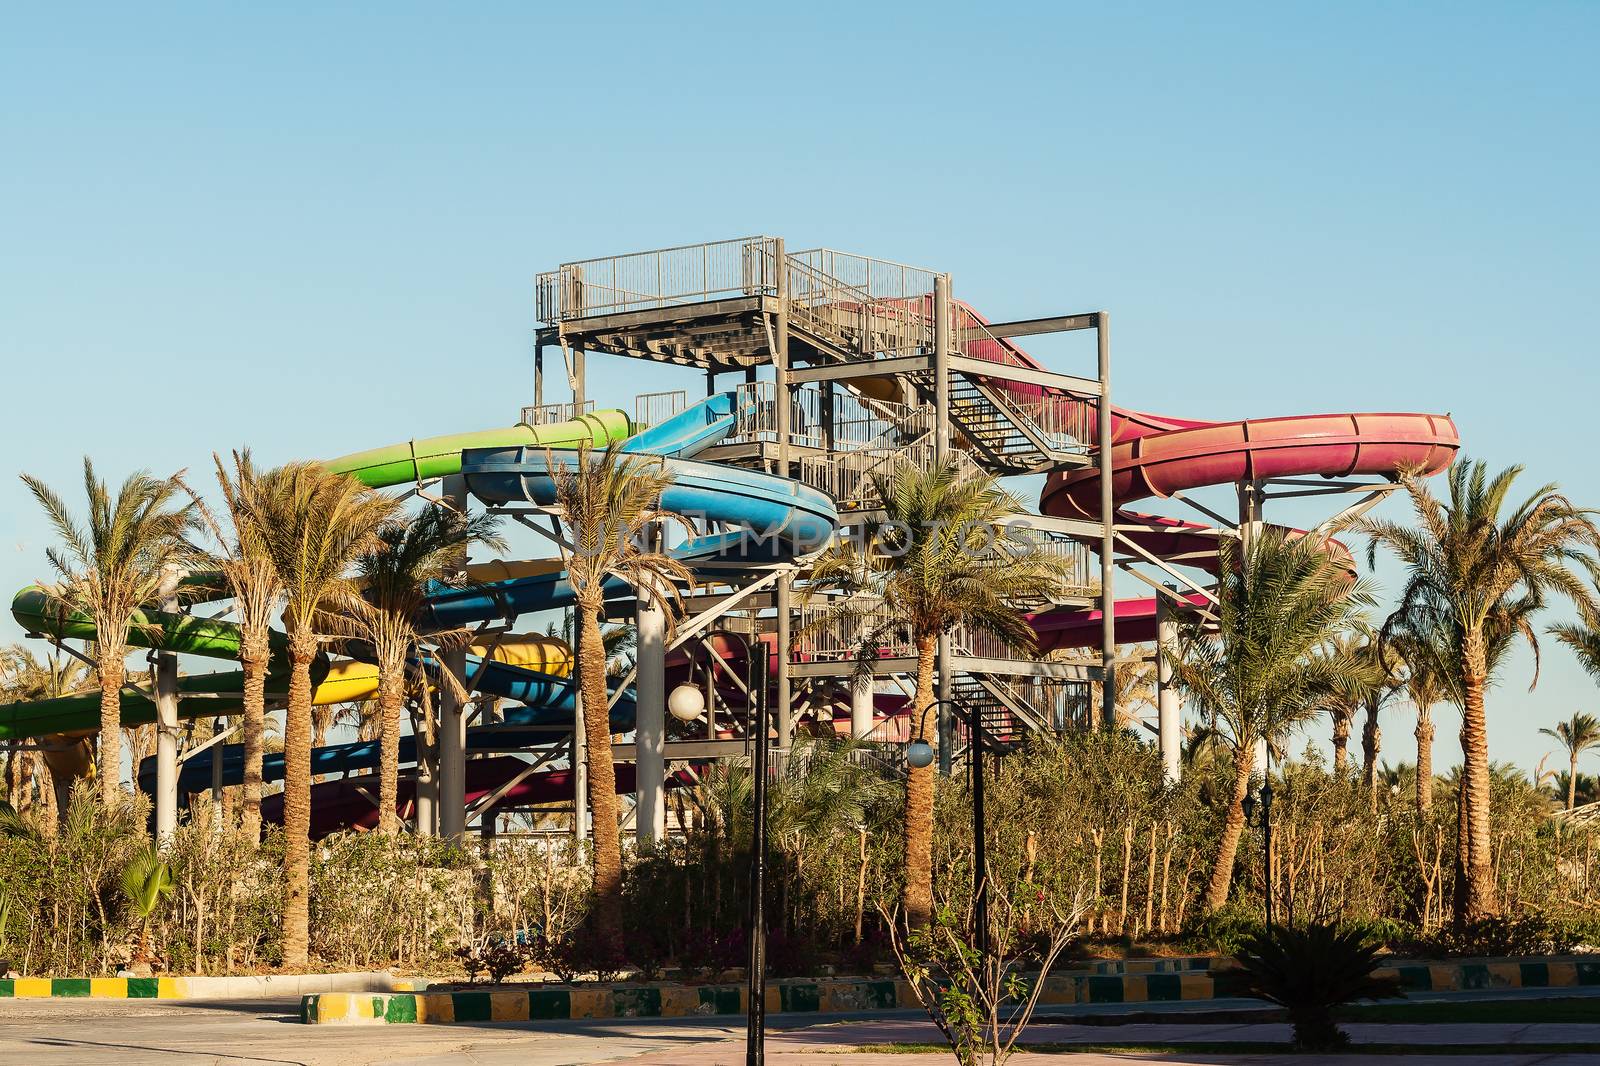 large water park on a background of palm trees by Tanacha